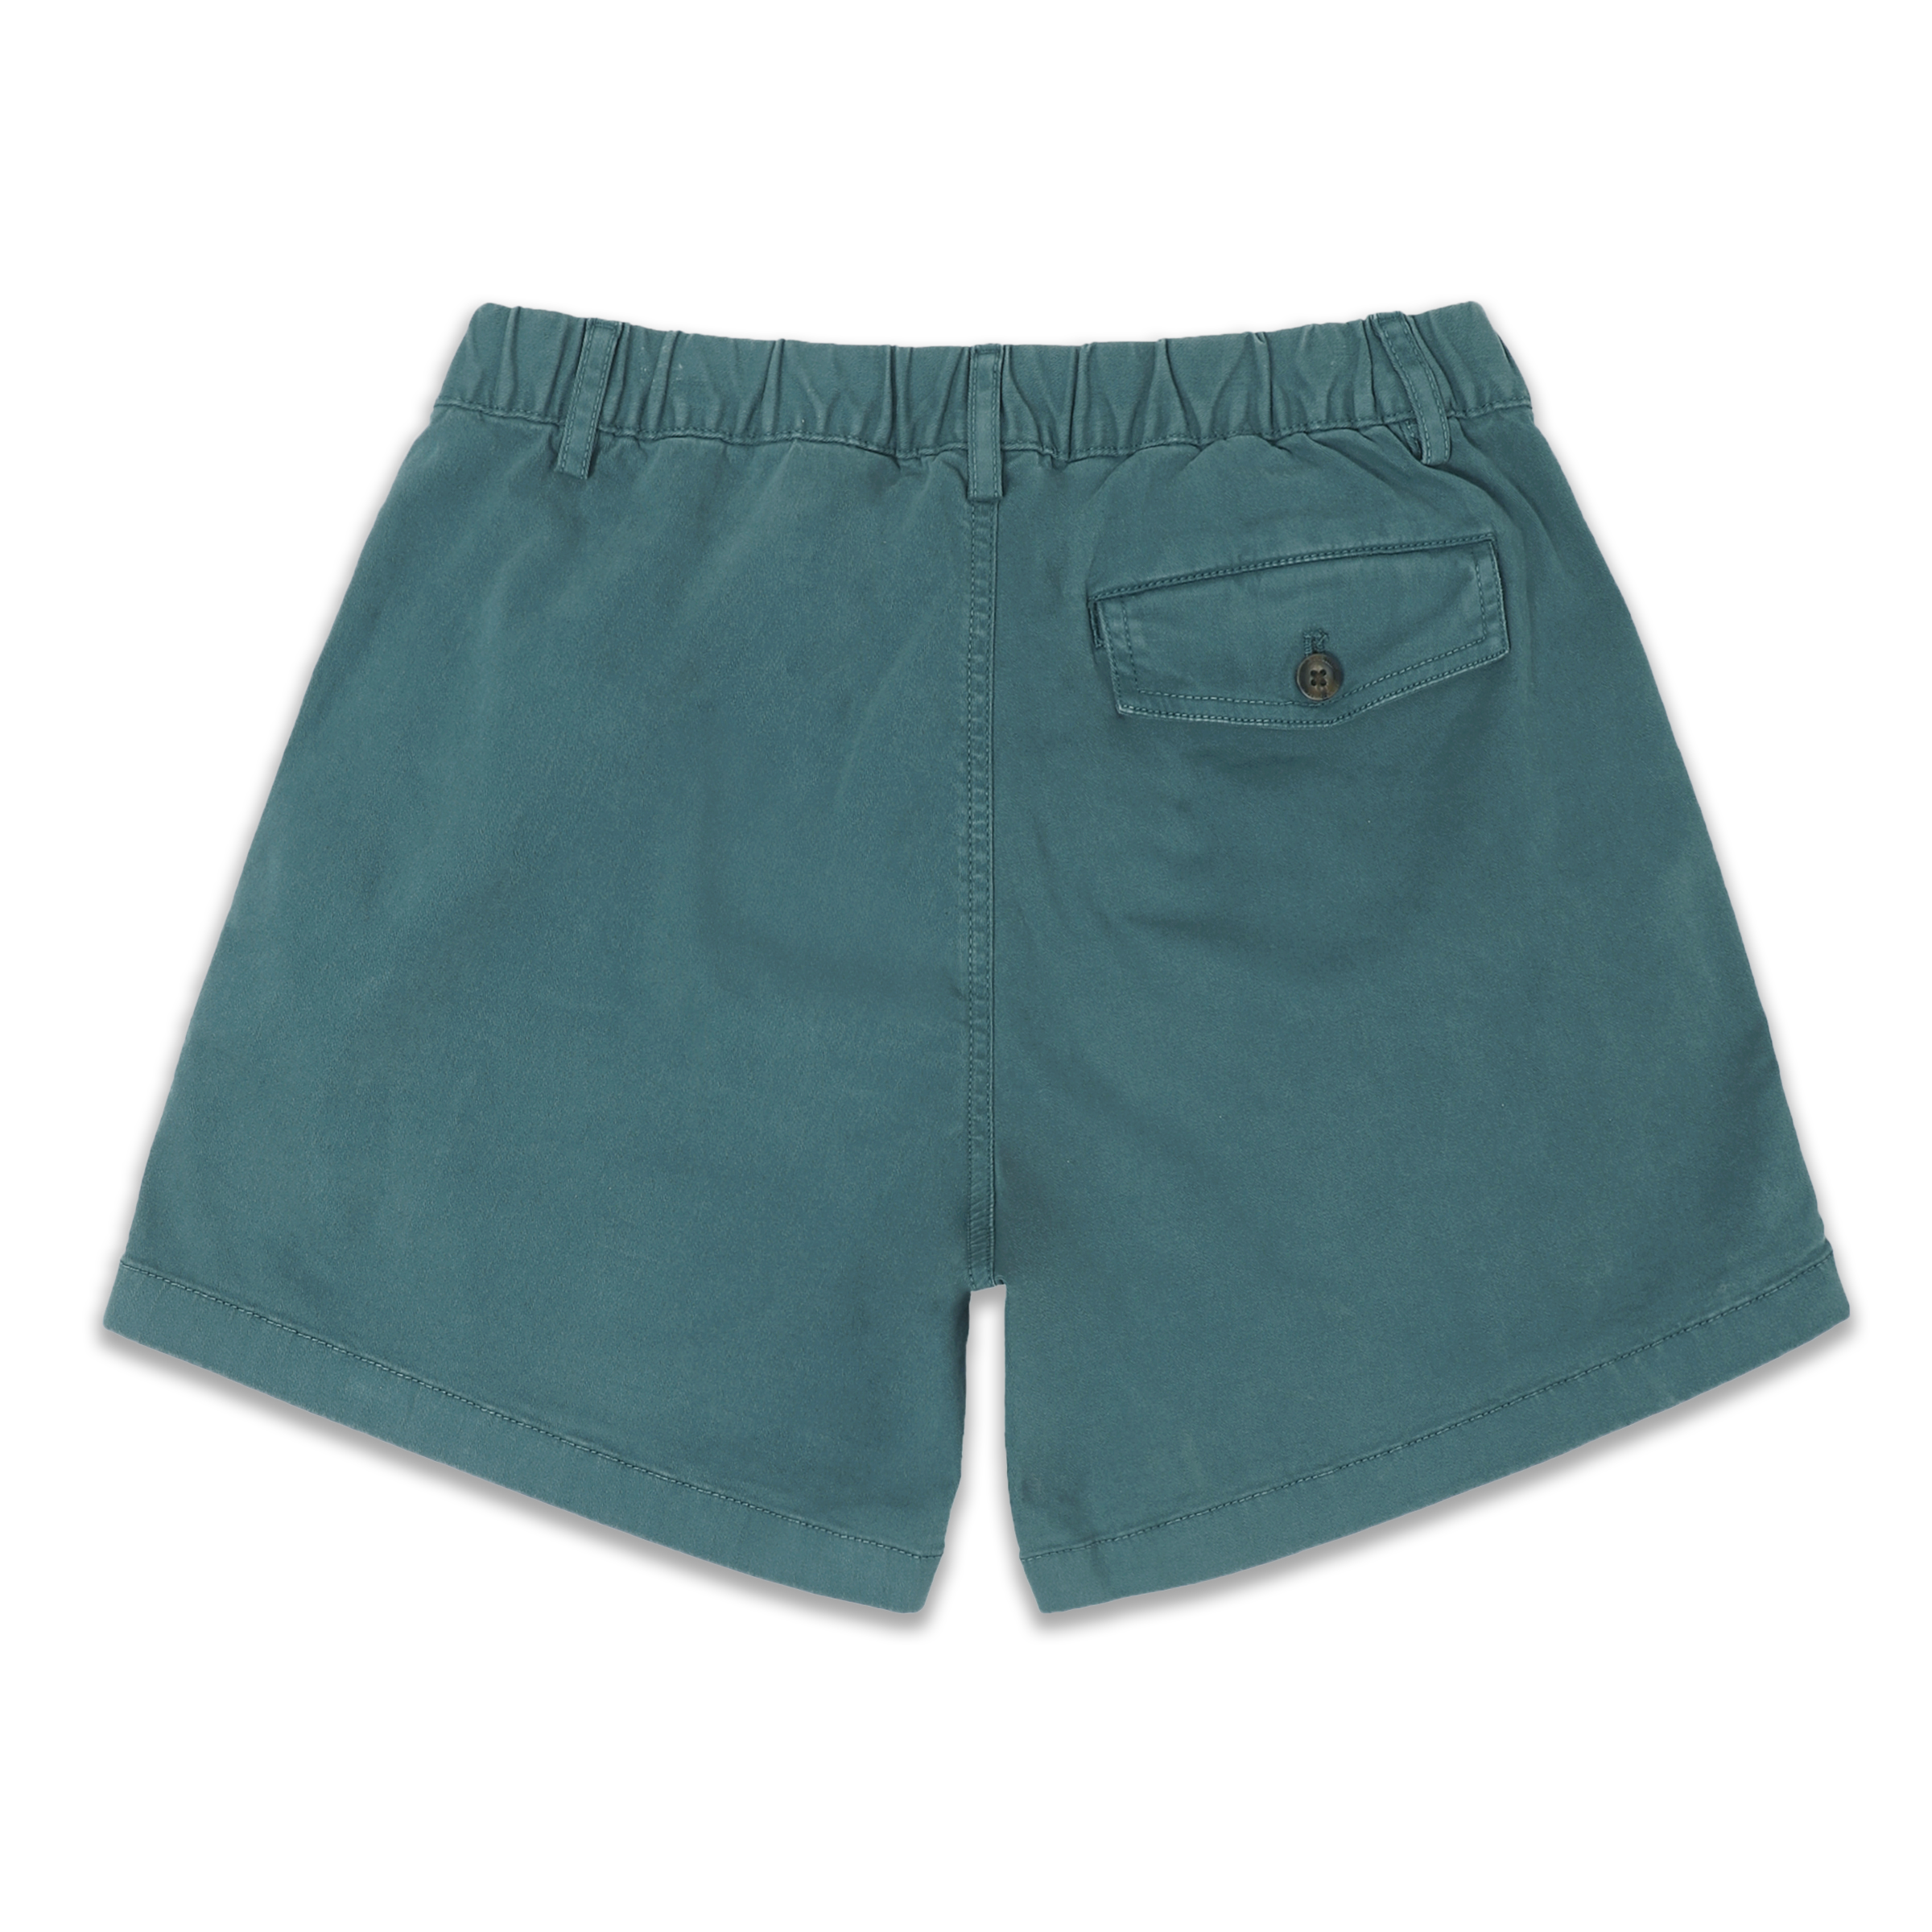 Stretch Short 5.5" Dark Teal back with elastic waistband, belt loops, and right buttoned back pocket